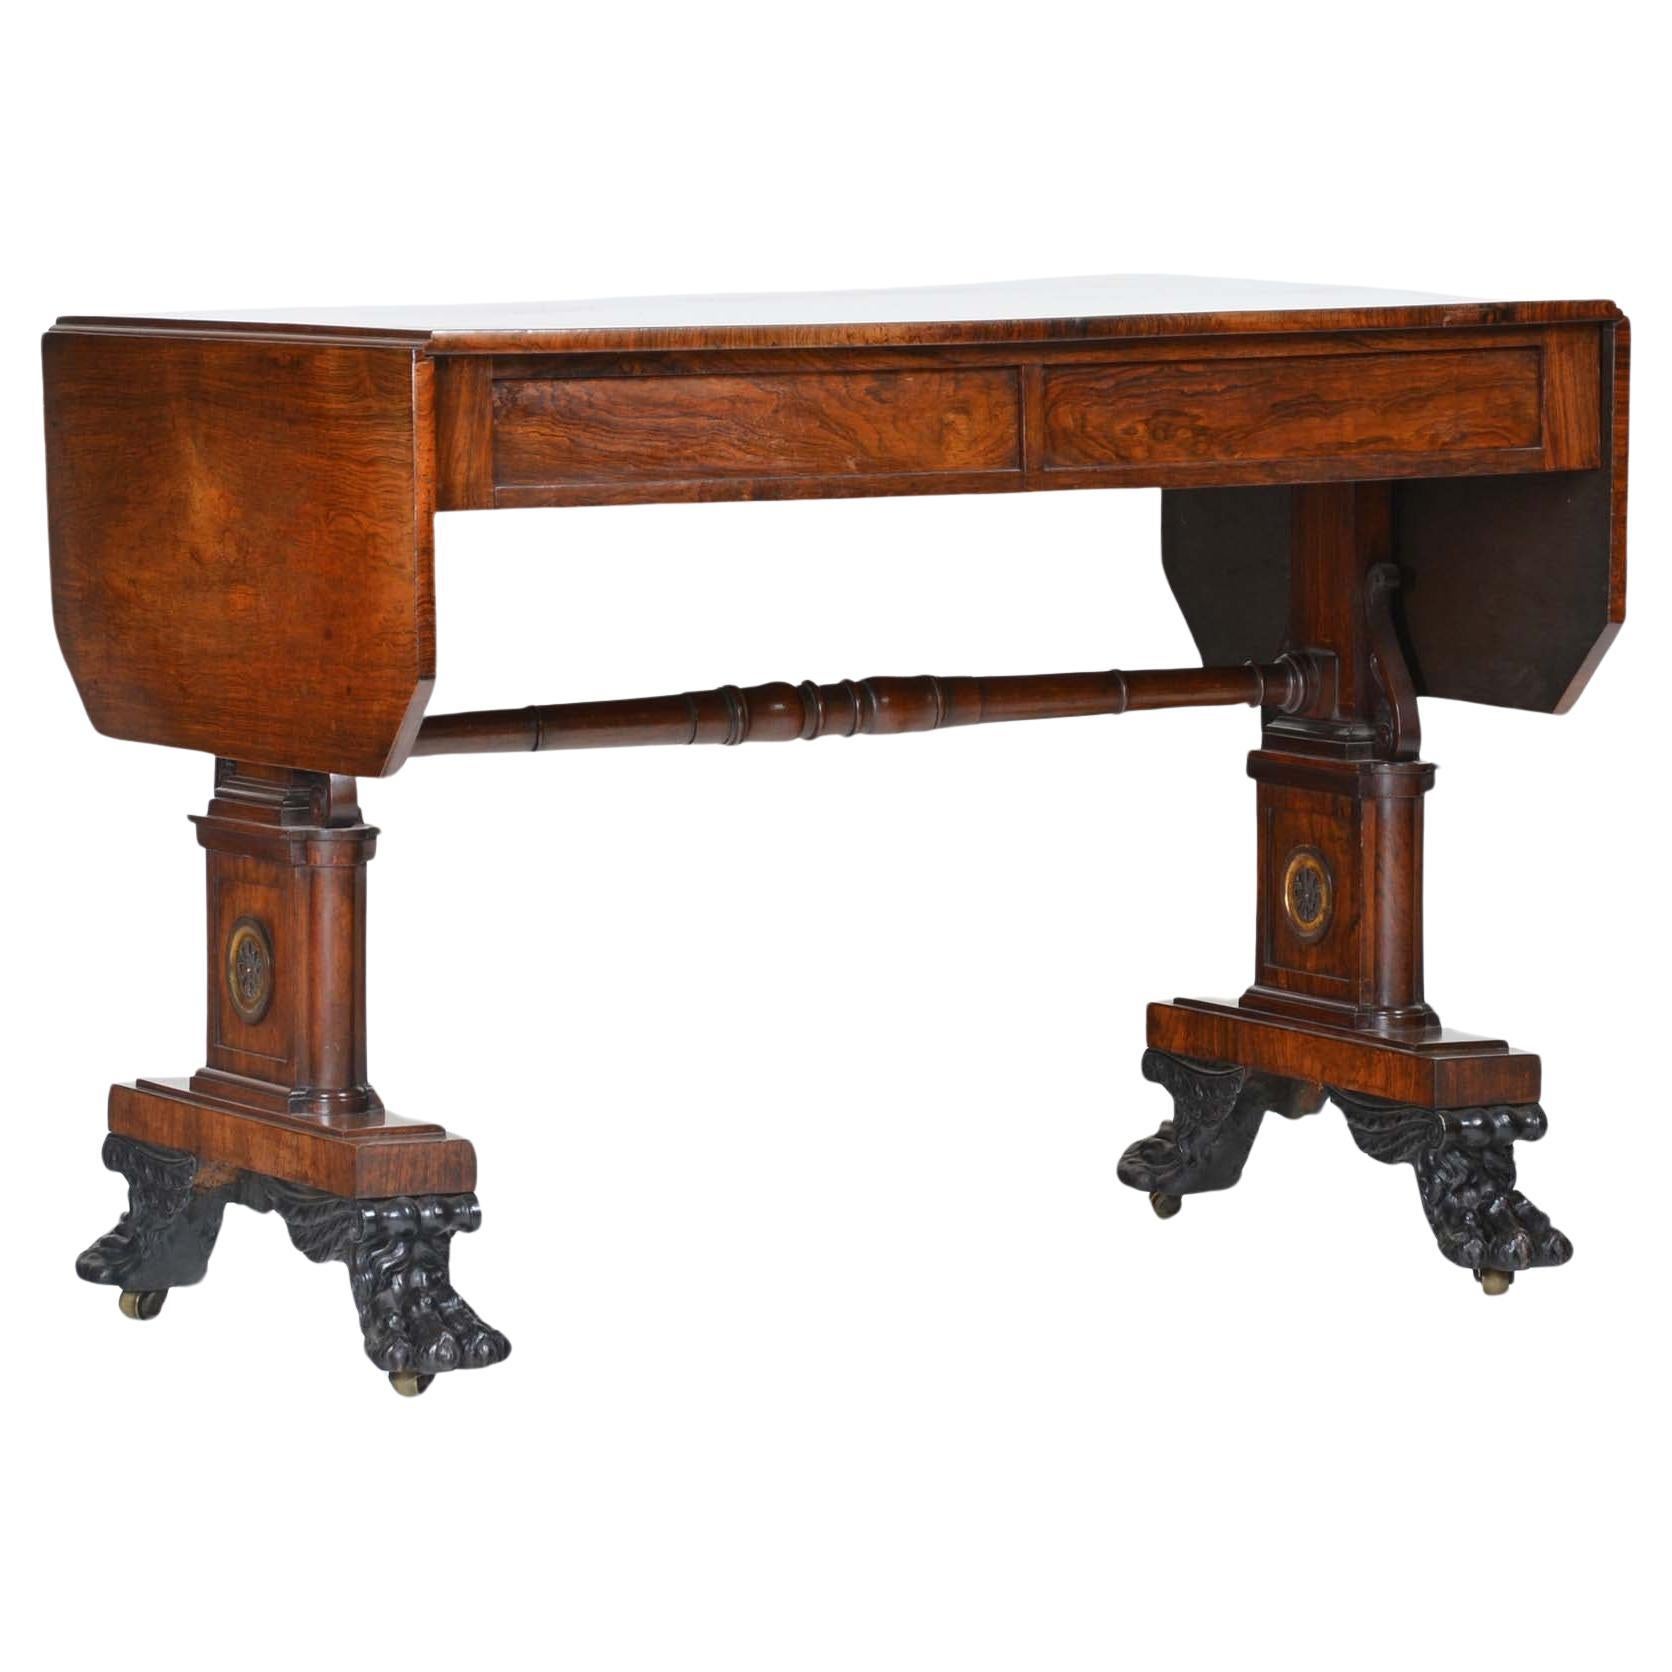 Regency Rosewood Sofa Table by William Wilkinson of Ludgate Hill